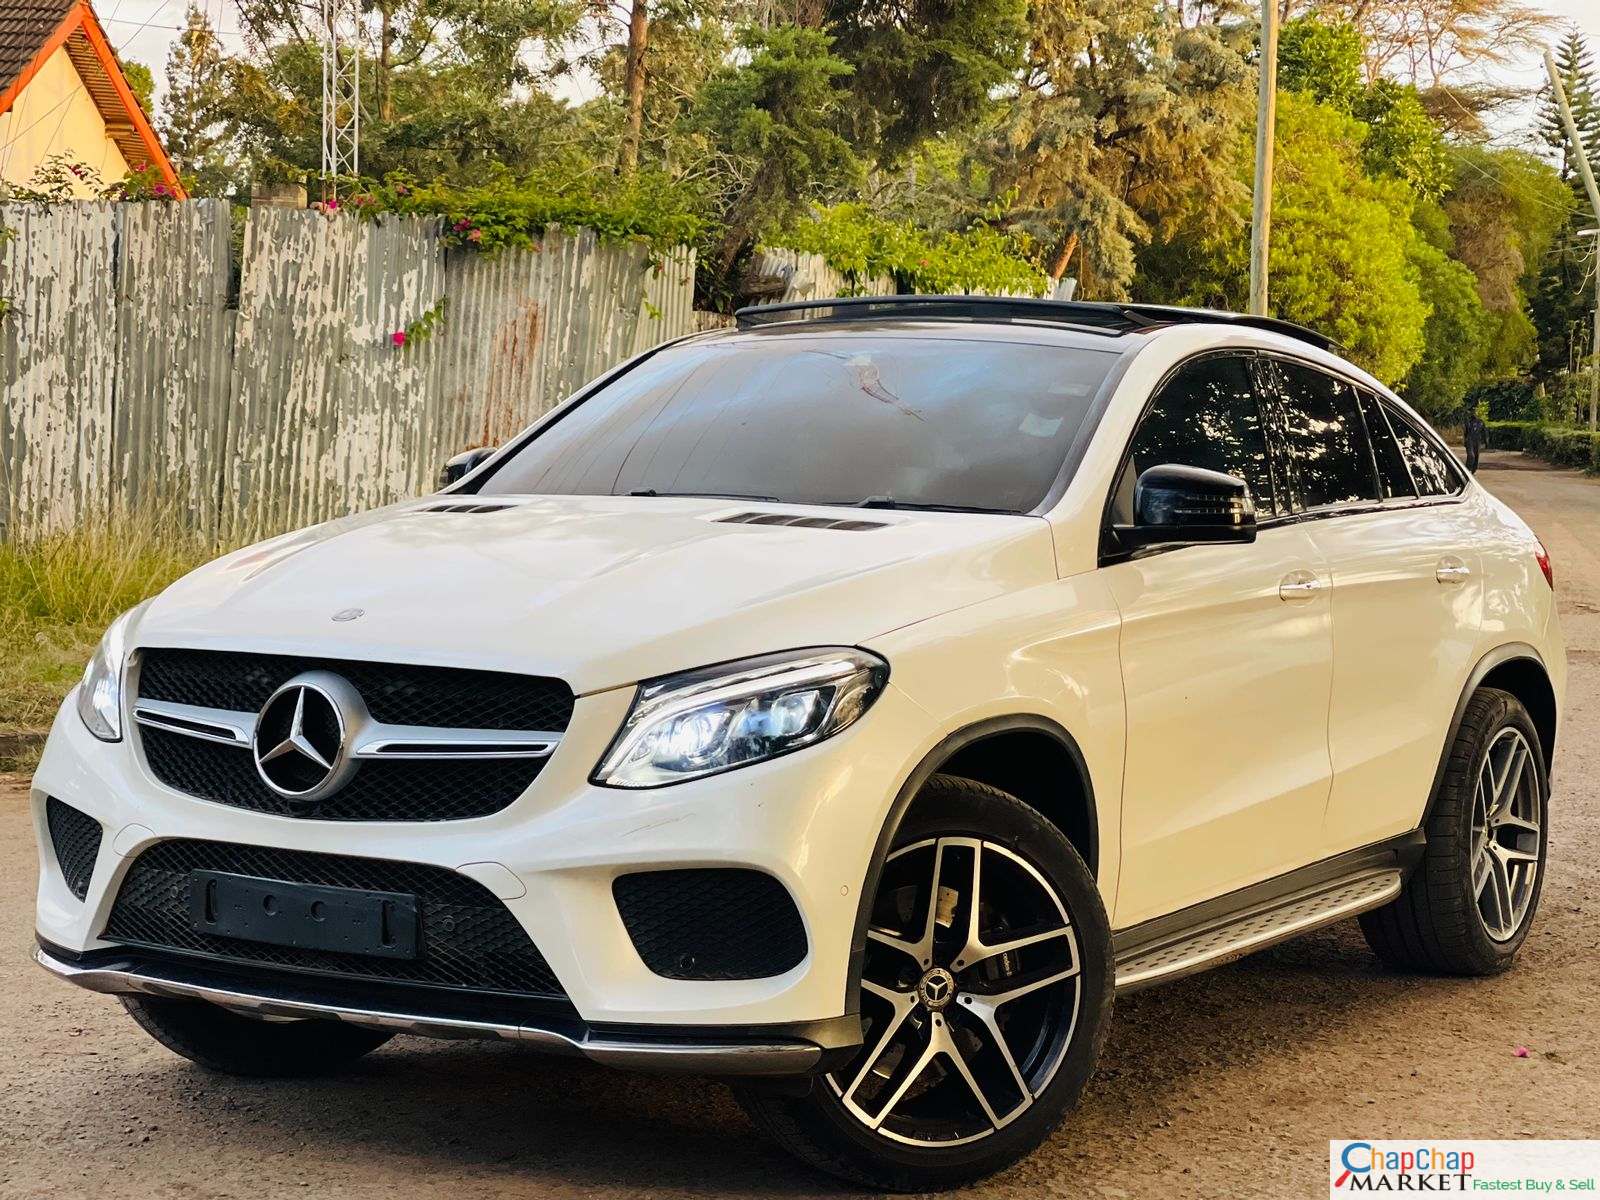 Cars Cars For Sale-Mercedes Benz GLE 400🔥 You Pay 30% DEPOSIT Mercedes GLE for sale in kenya hire purchase installments GLE Trade in OK EXCLUSIVE